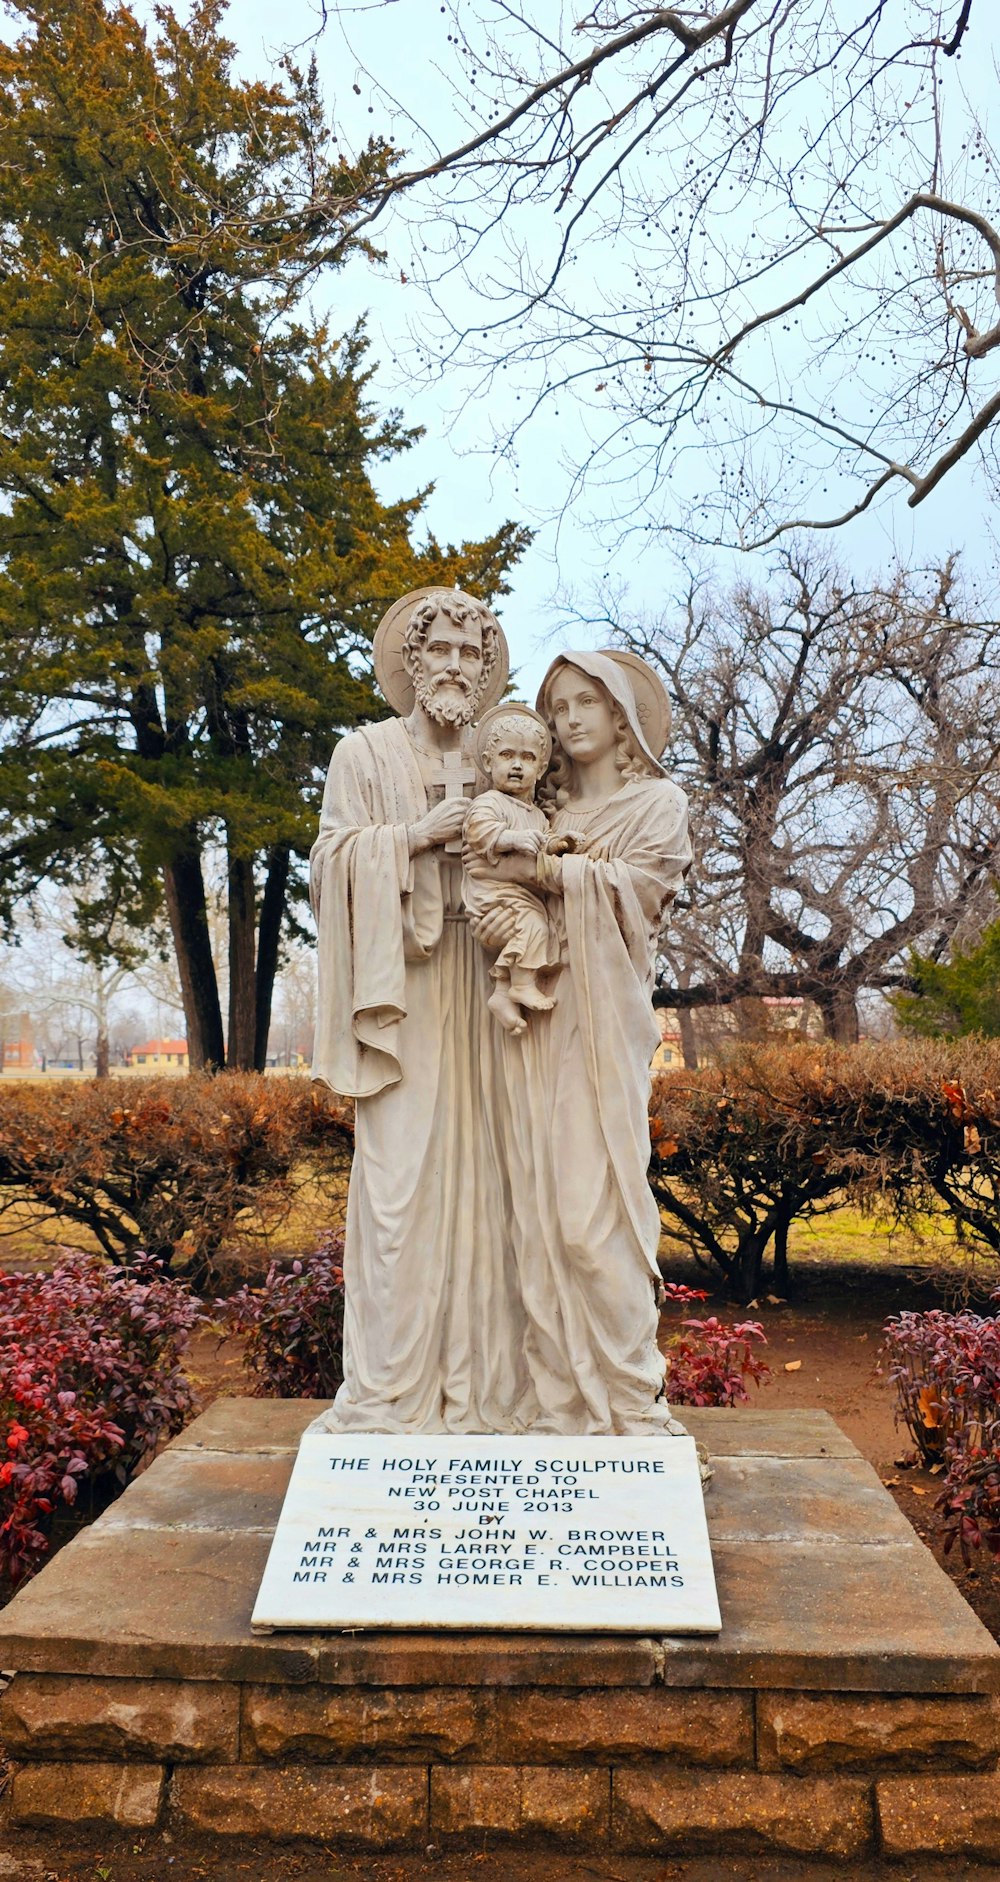 a statue of a man holding a child